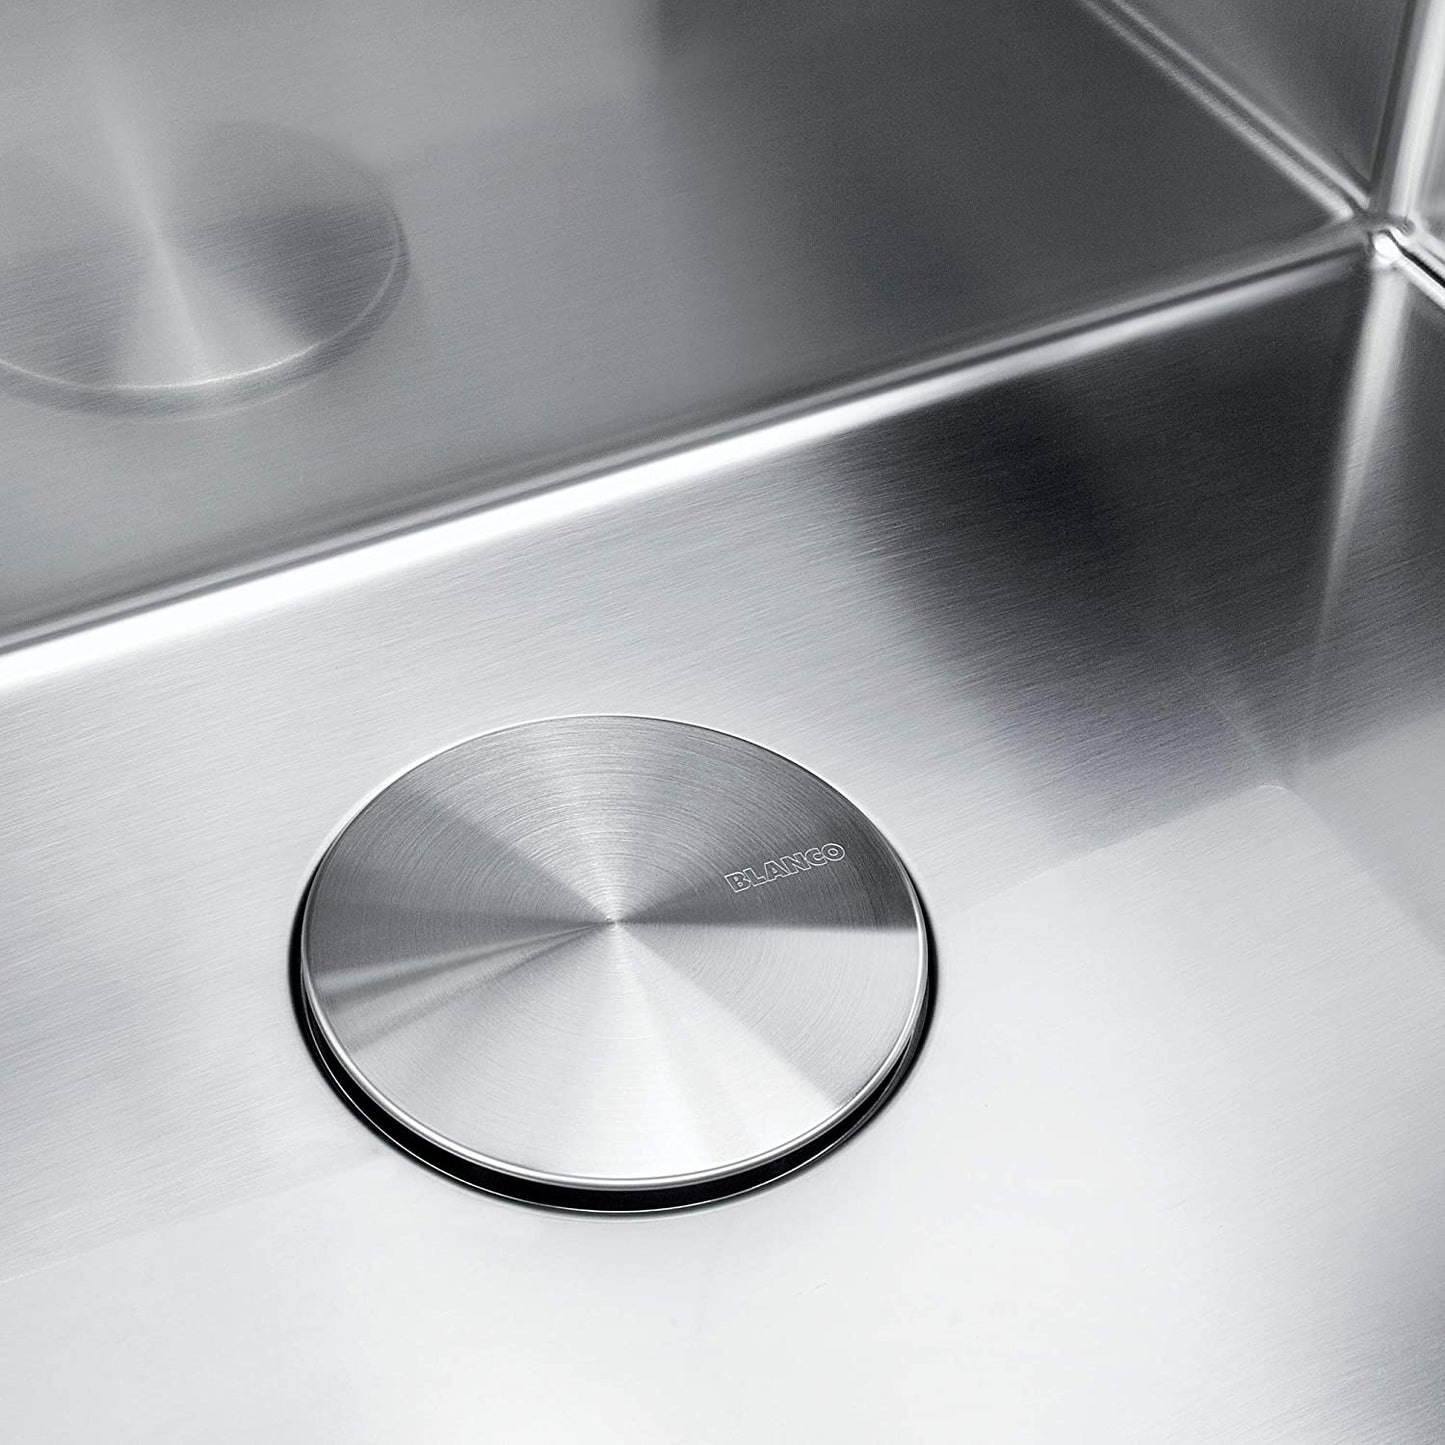 Cap Flow Decorative Drain Cover- Stainless